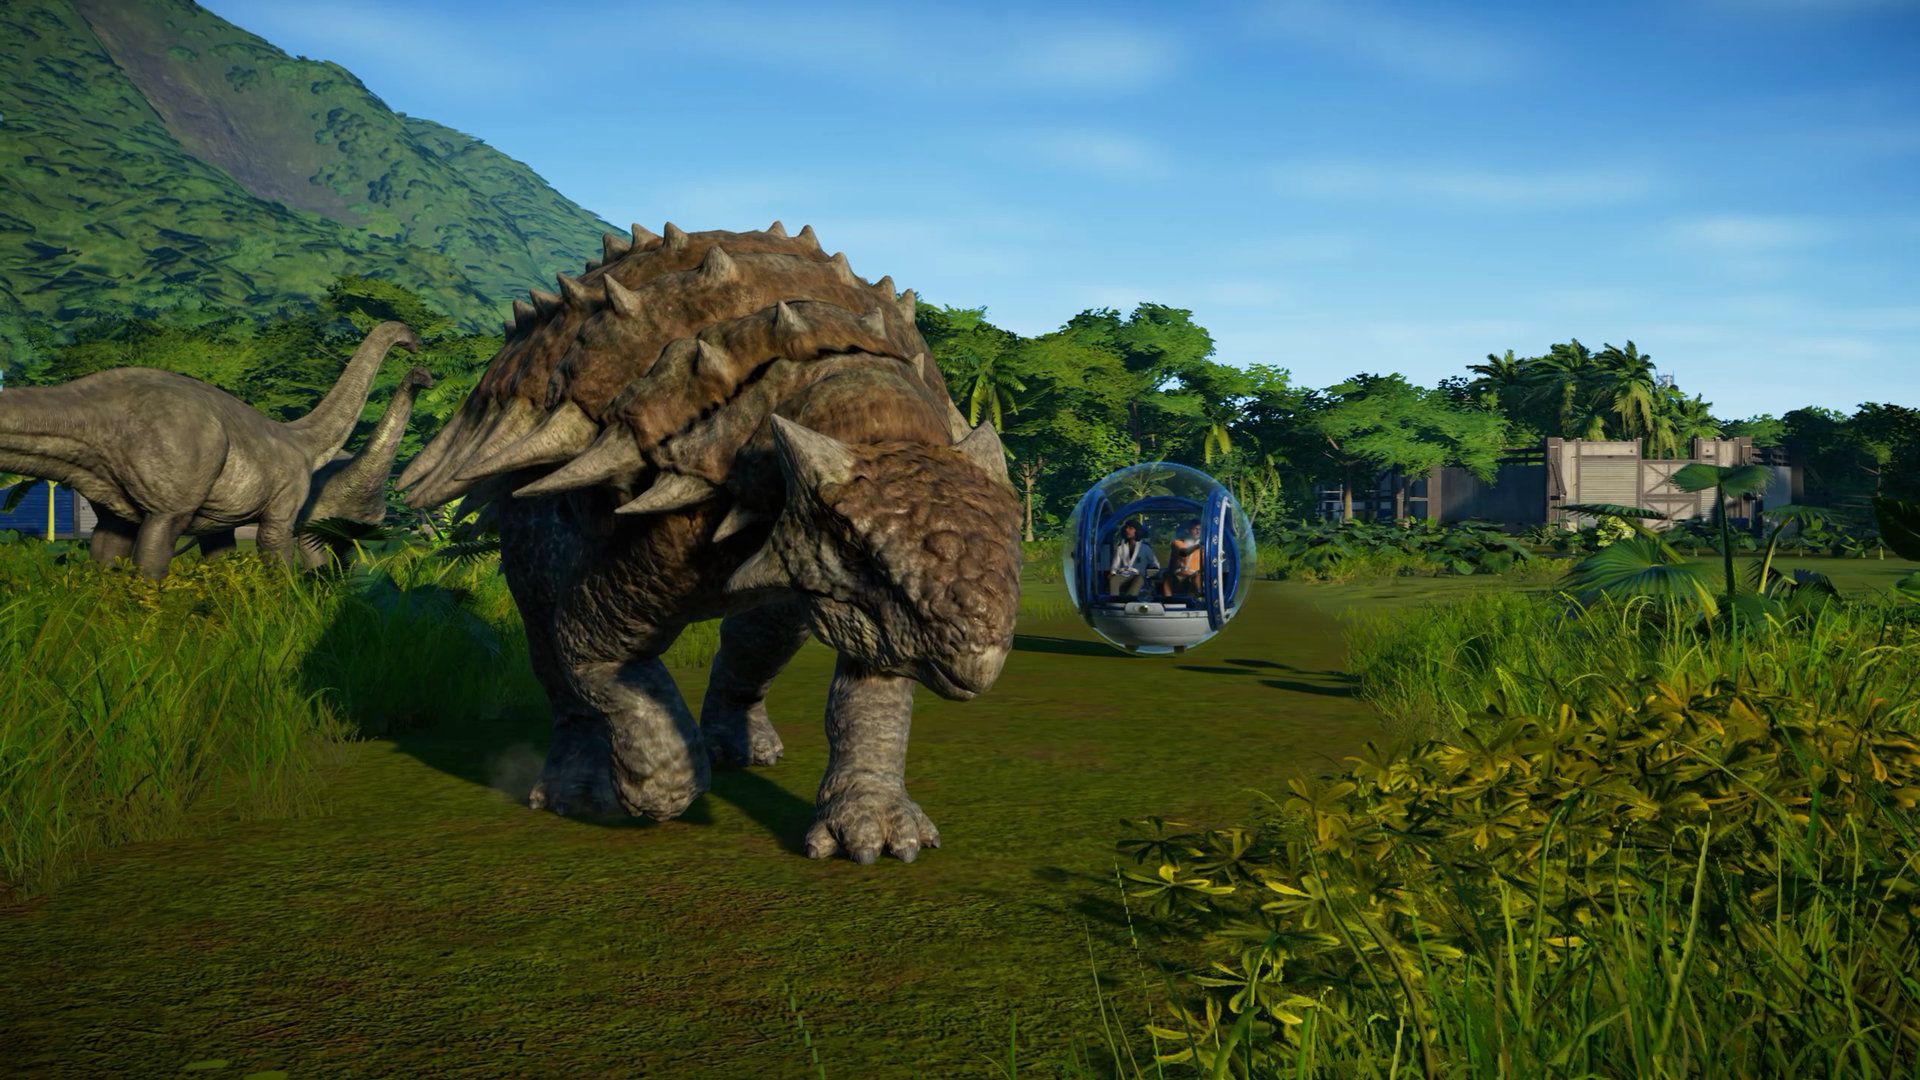 jurassic world video game trailer reveals the simcity